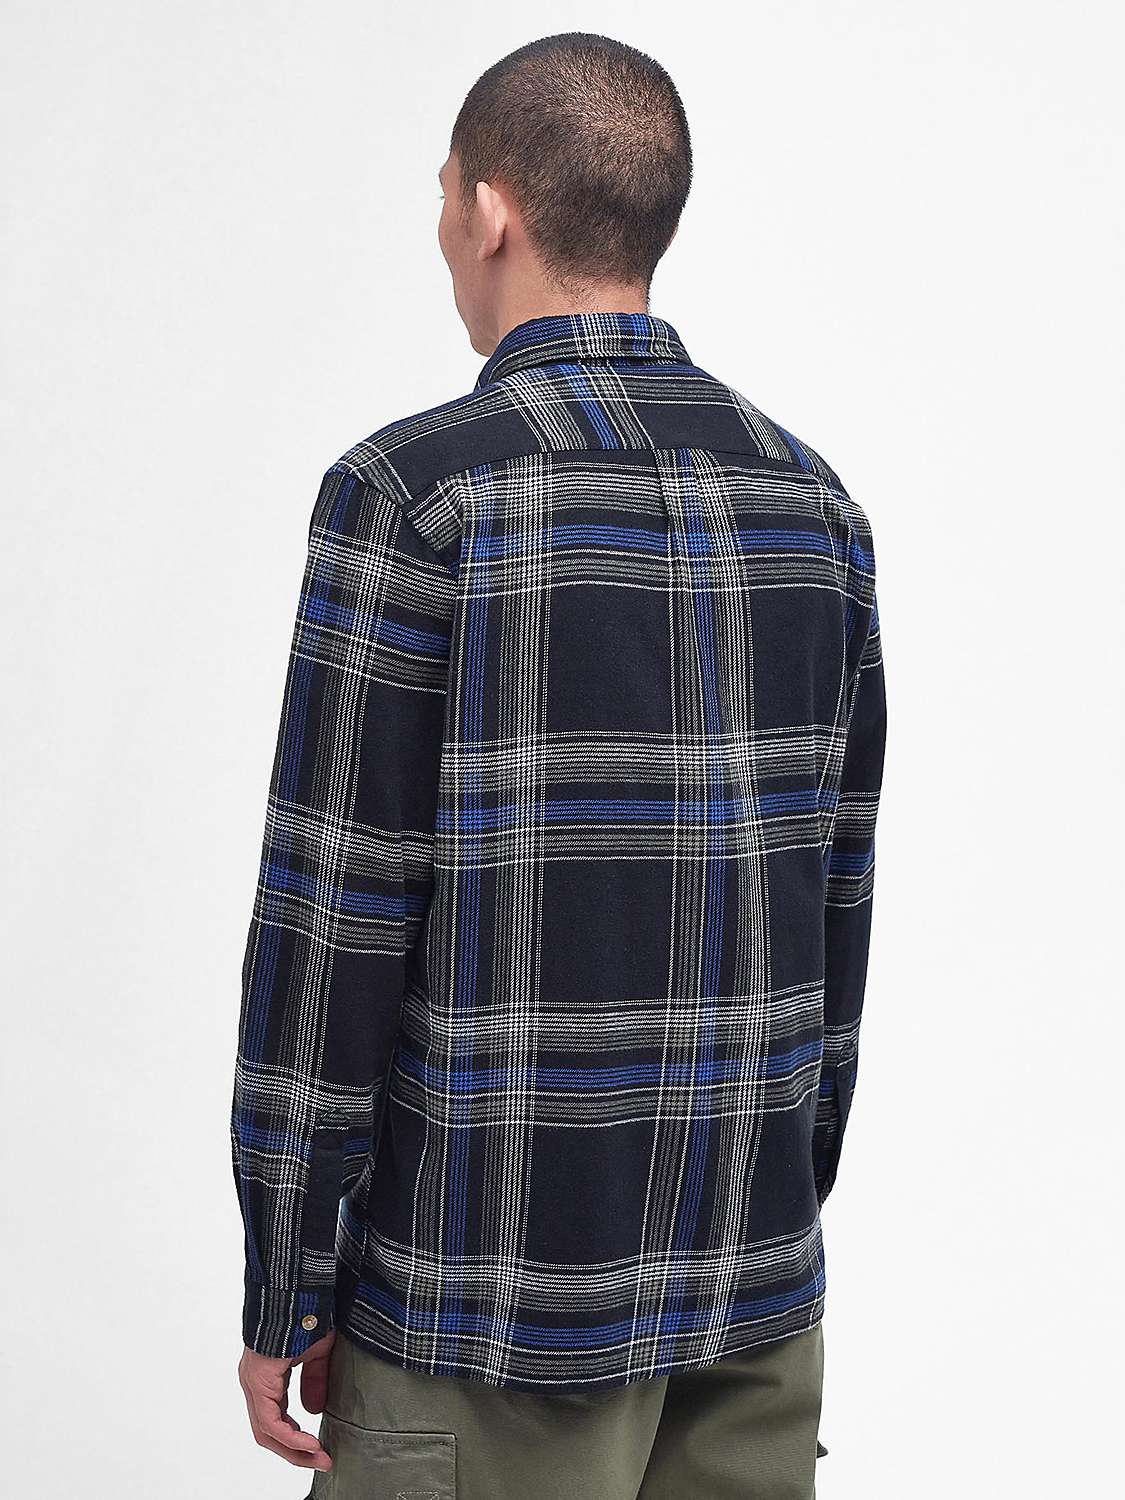 Buy Barbour Dartmouth Long Sleeve Shirt Online at johnlewis.com